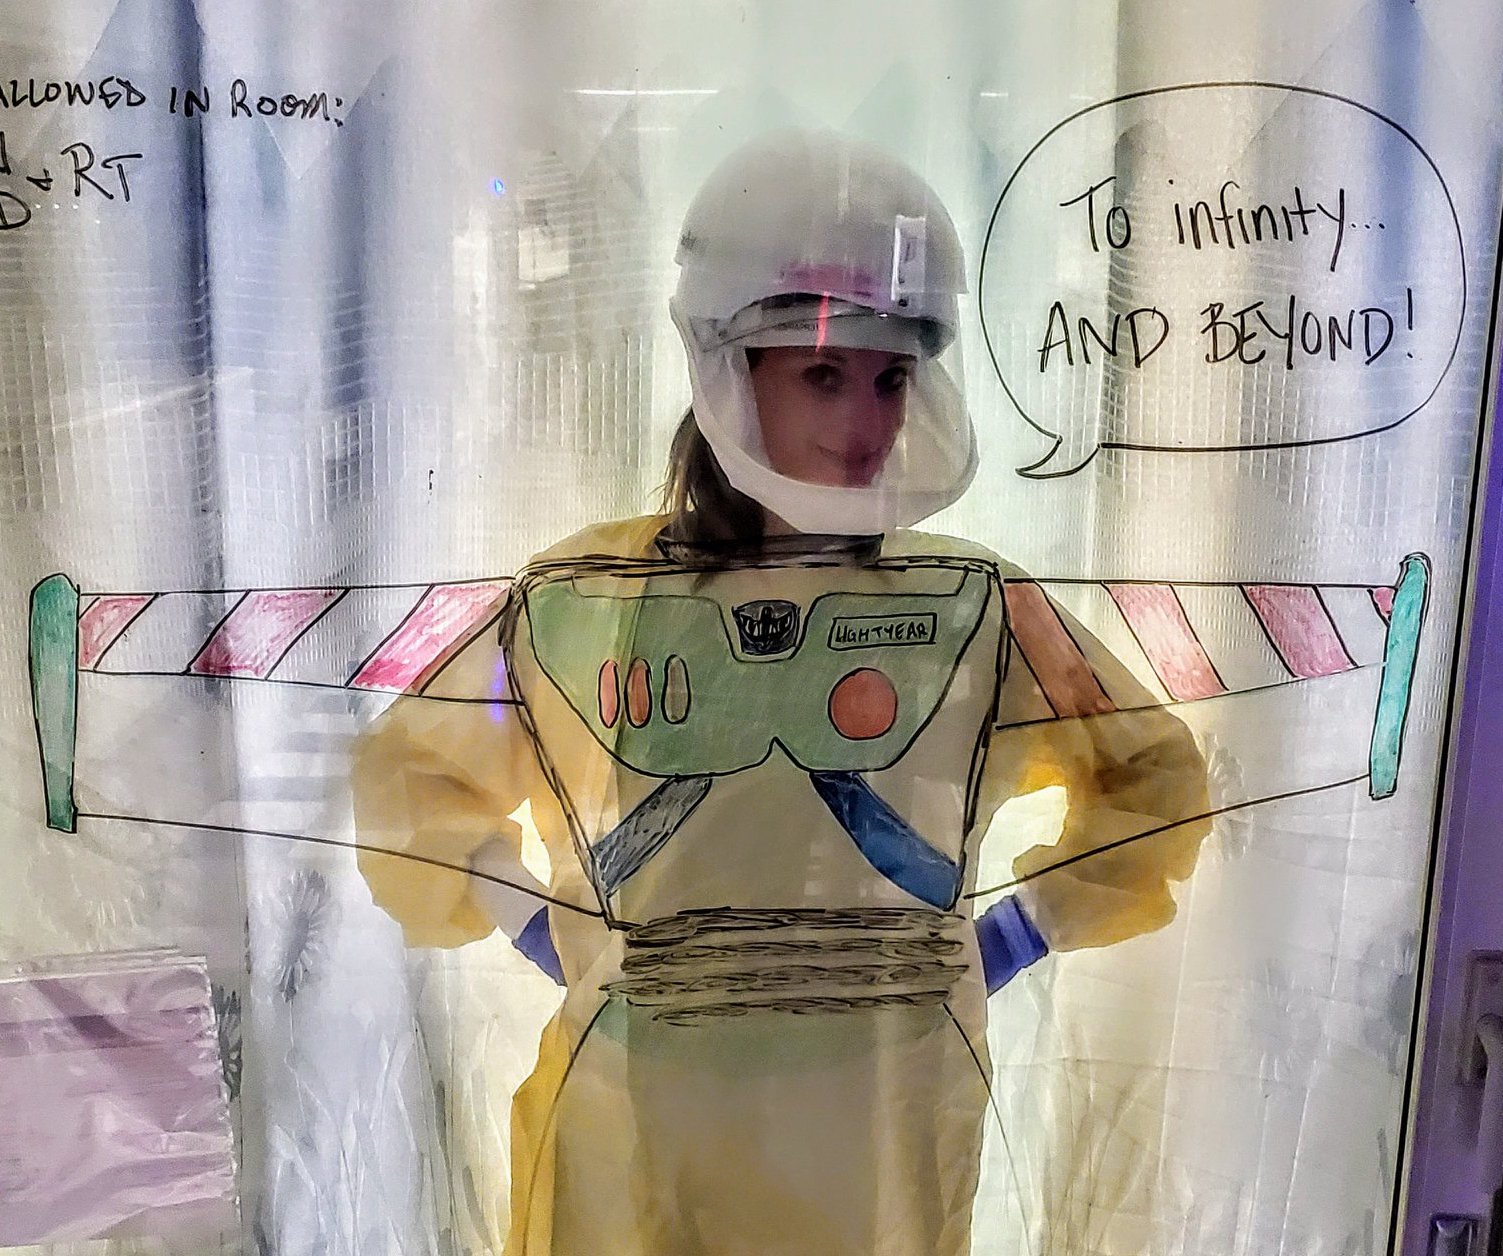 A person standing behind a glass wall wearing personal protective equipment. On the glass is a drawing of the cartoon character, Buzz Lightyear, with the words, "To infinity and beyond..."